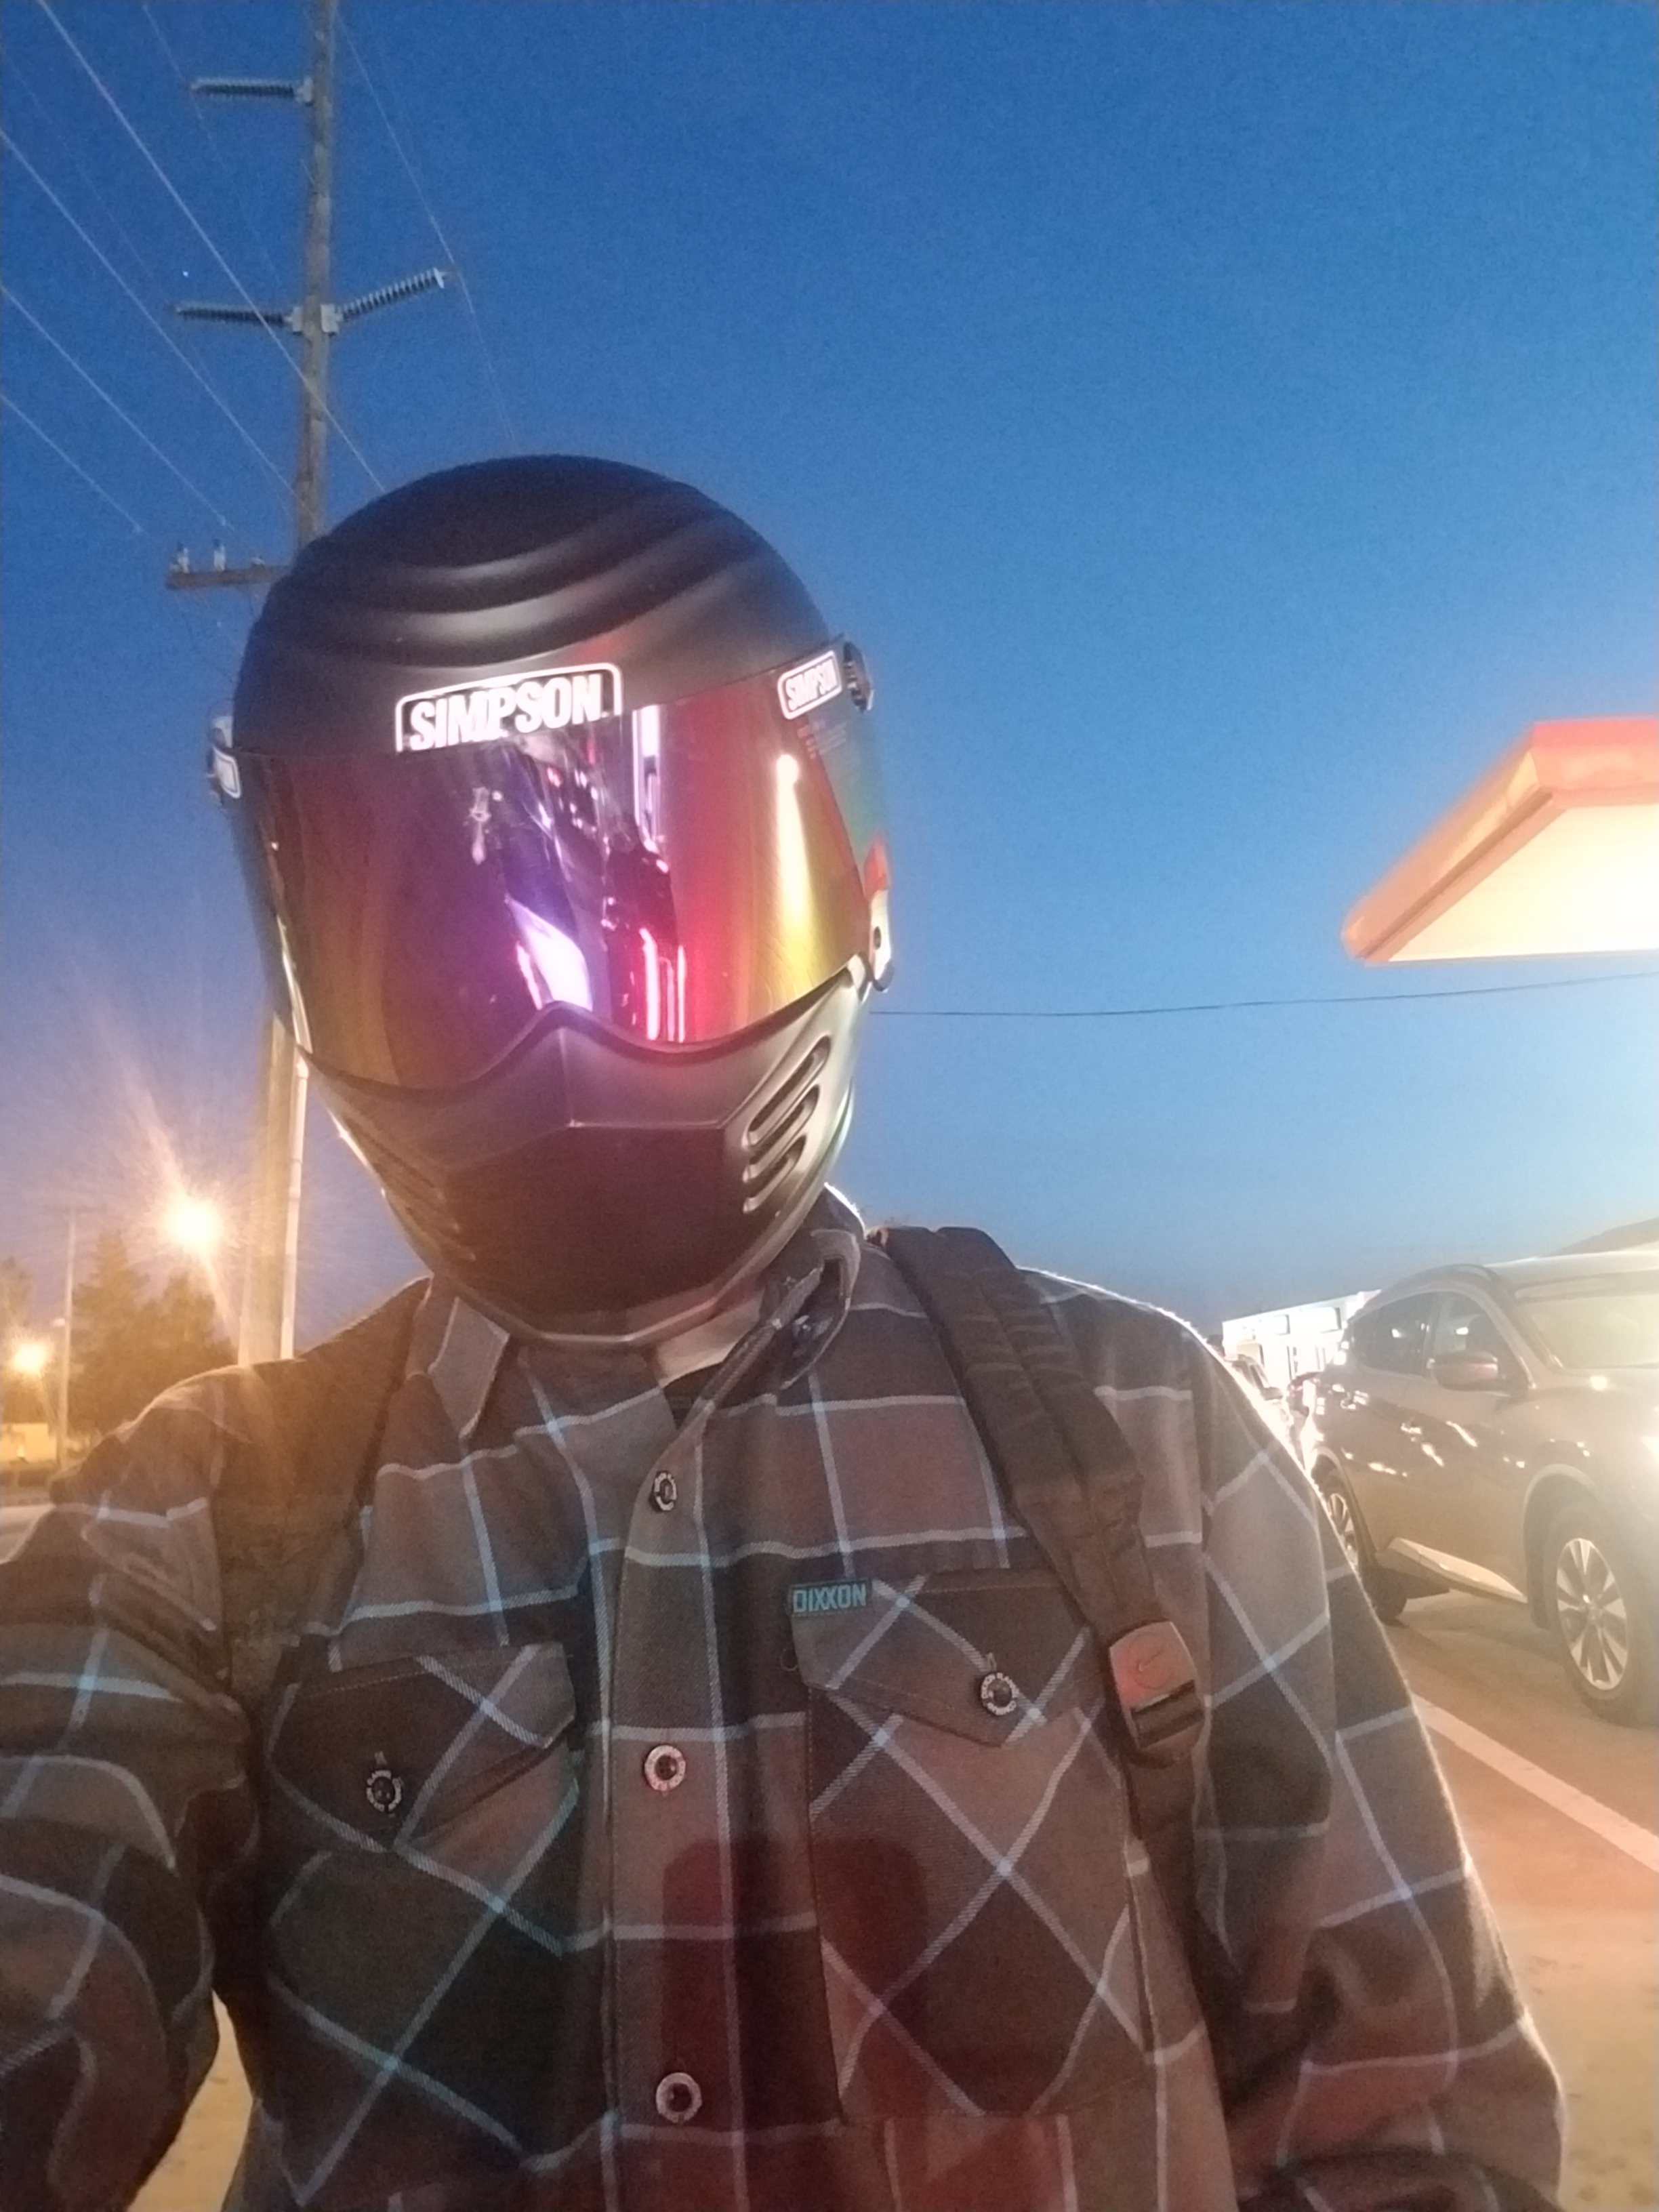 Night out on the FTR 1200 S